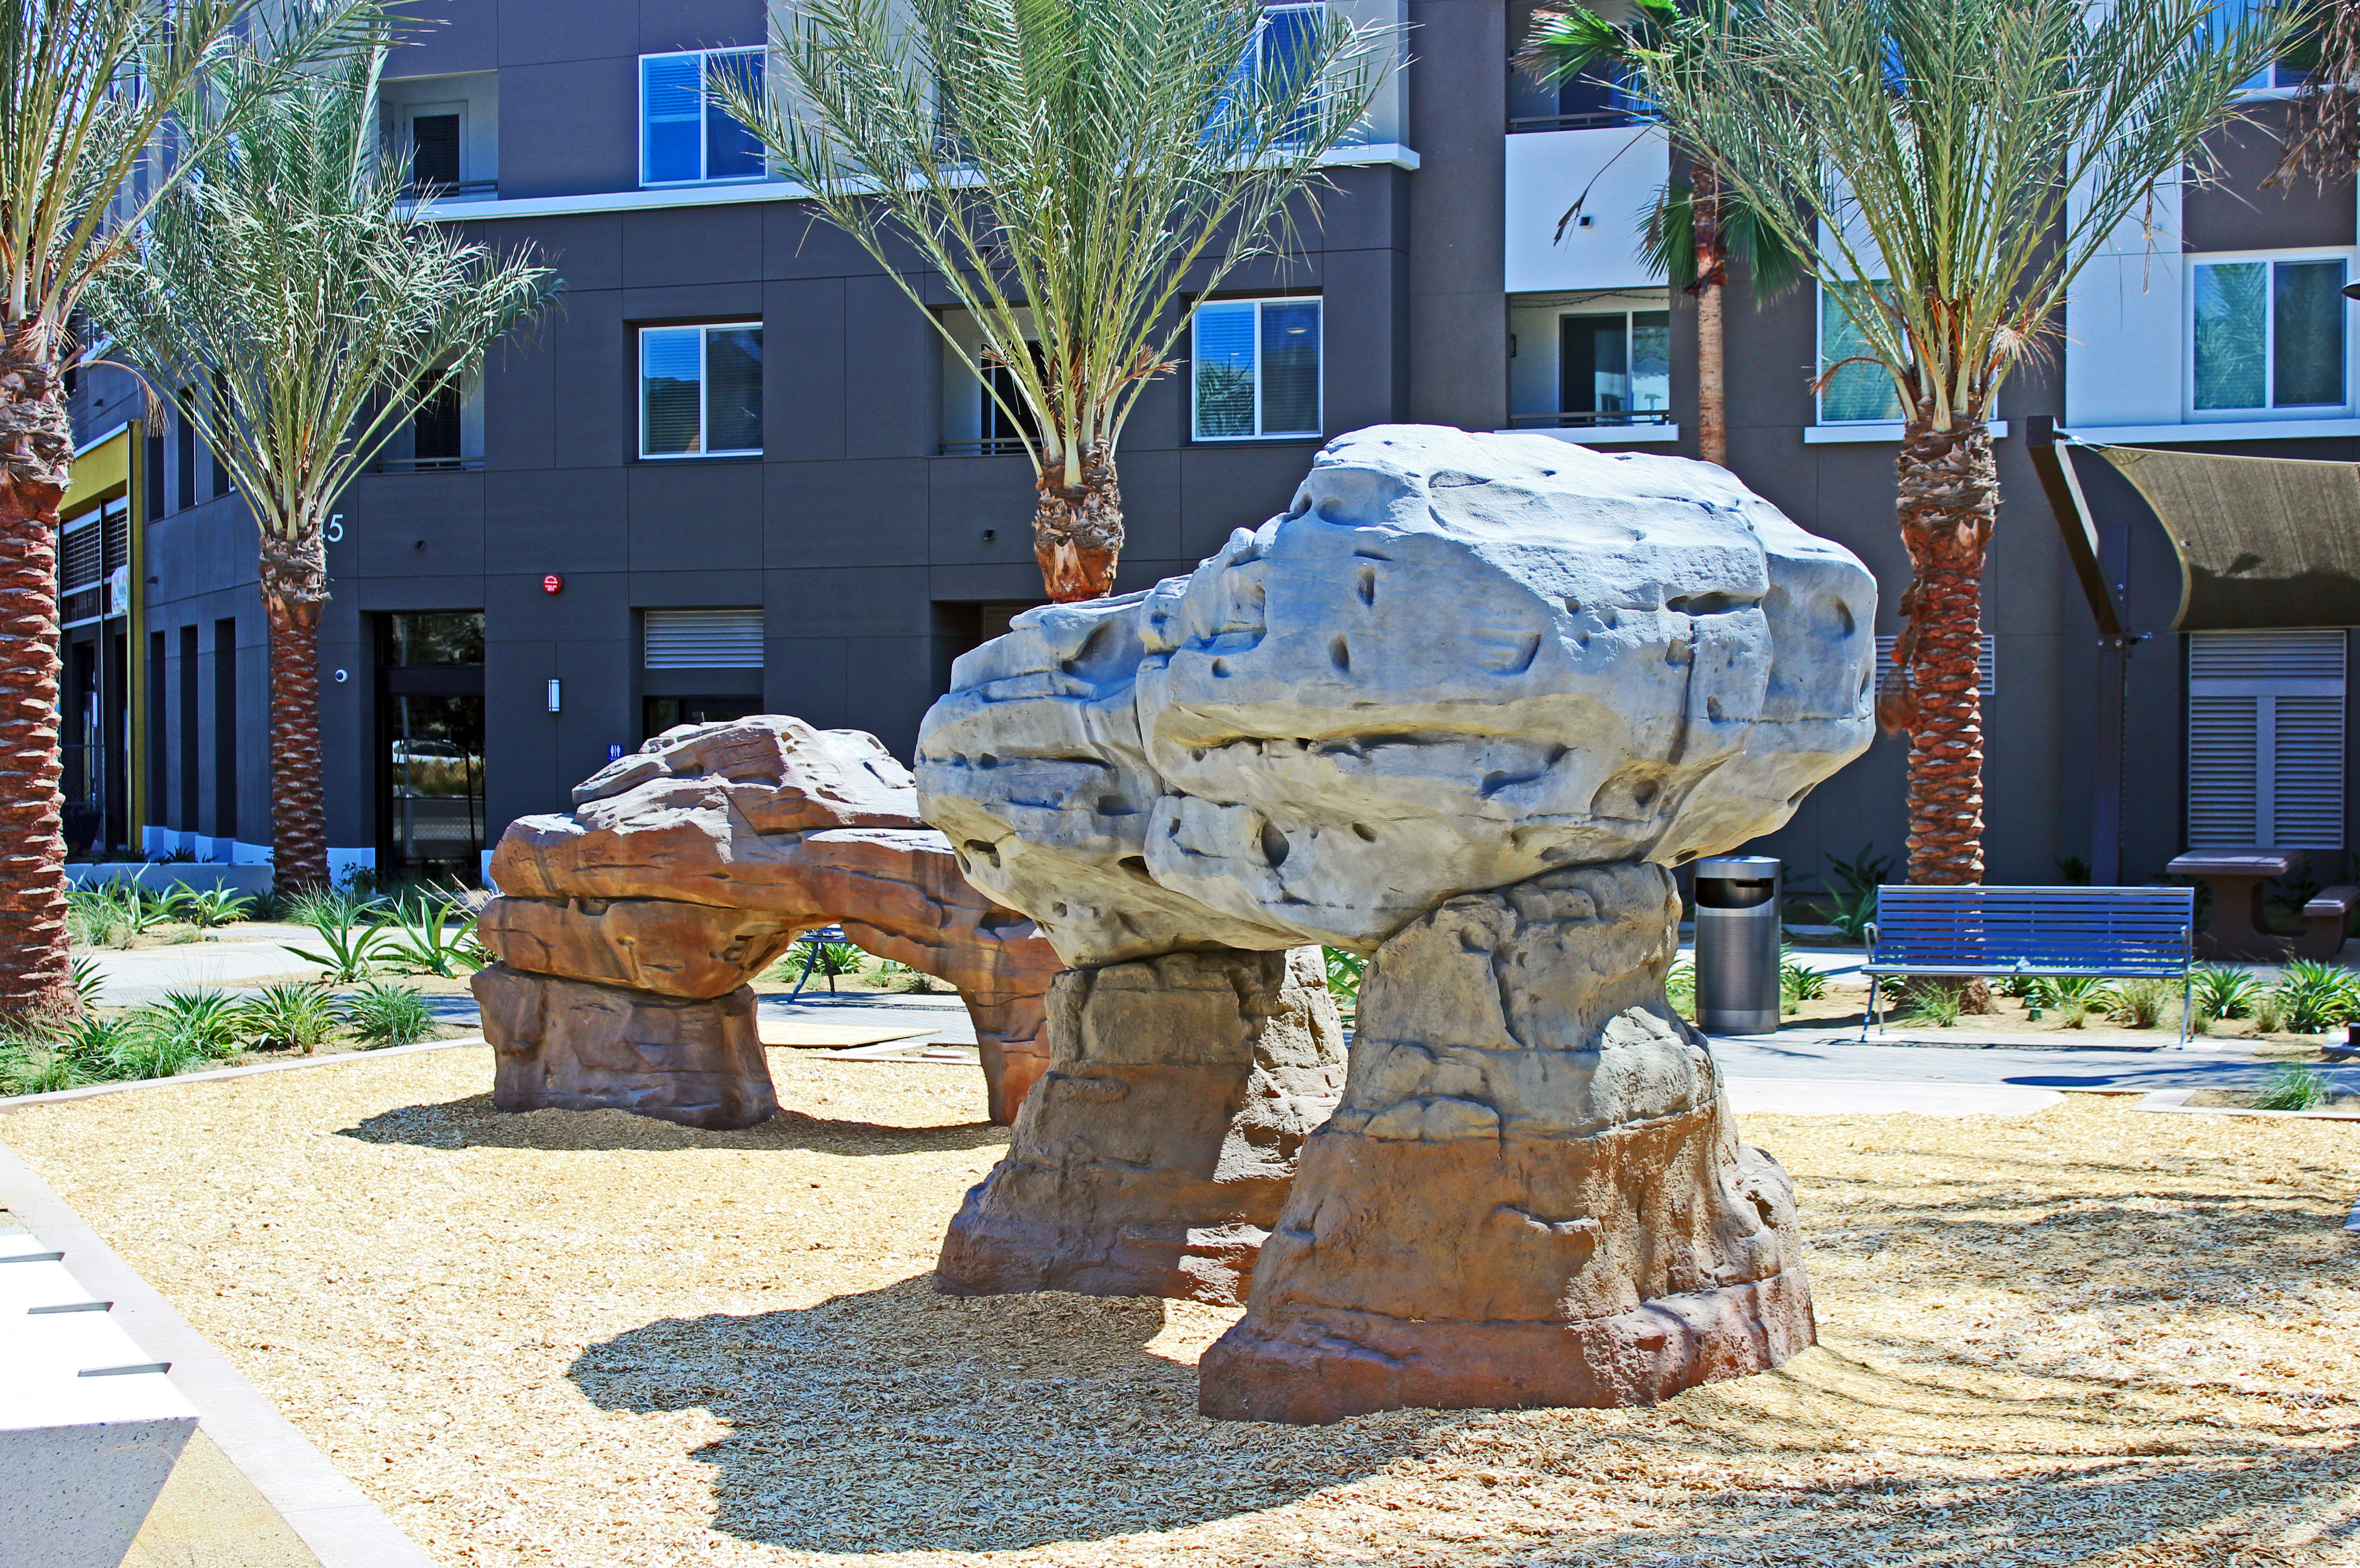 Customized playground equipment like this Sandstone Arch